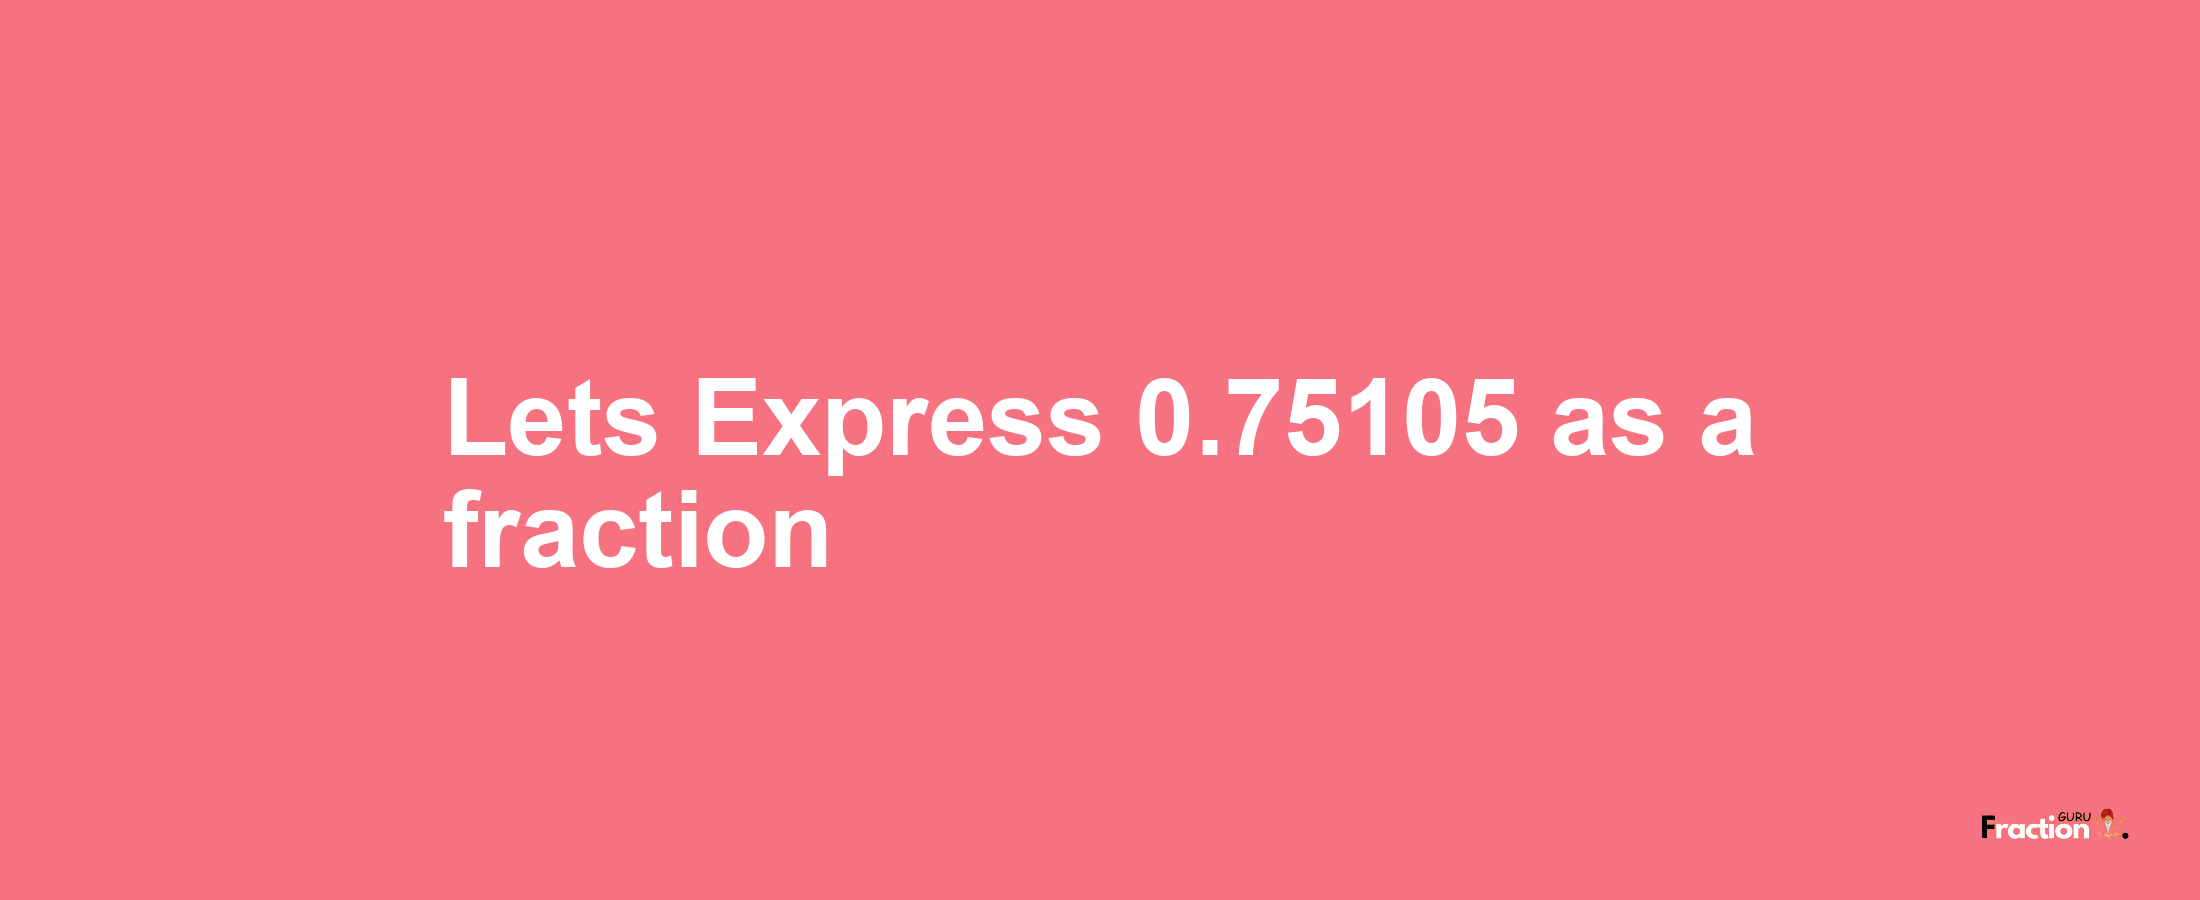 Lets Express 0.75105 as afraction